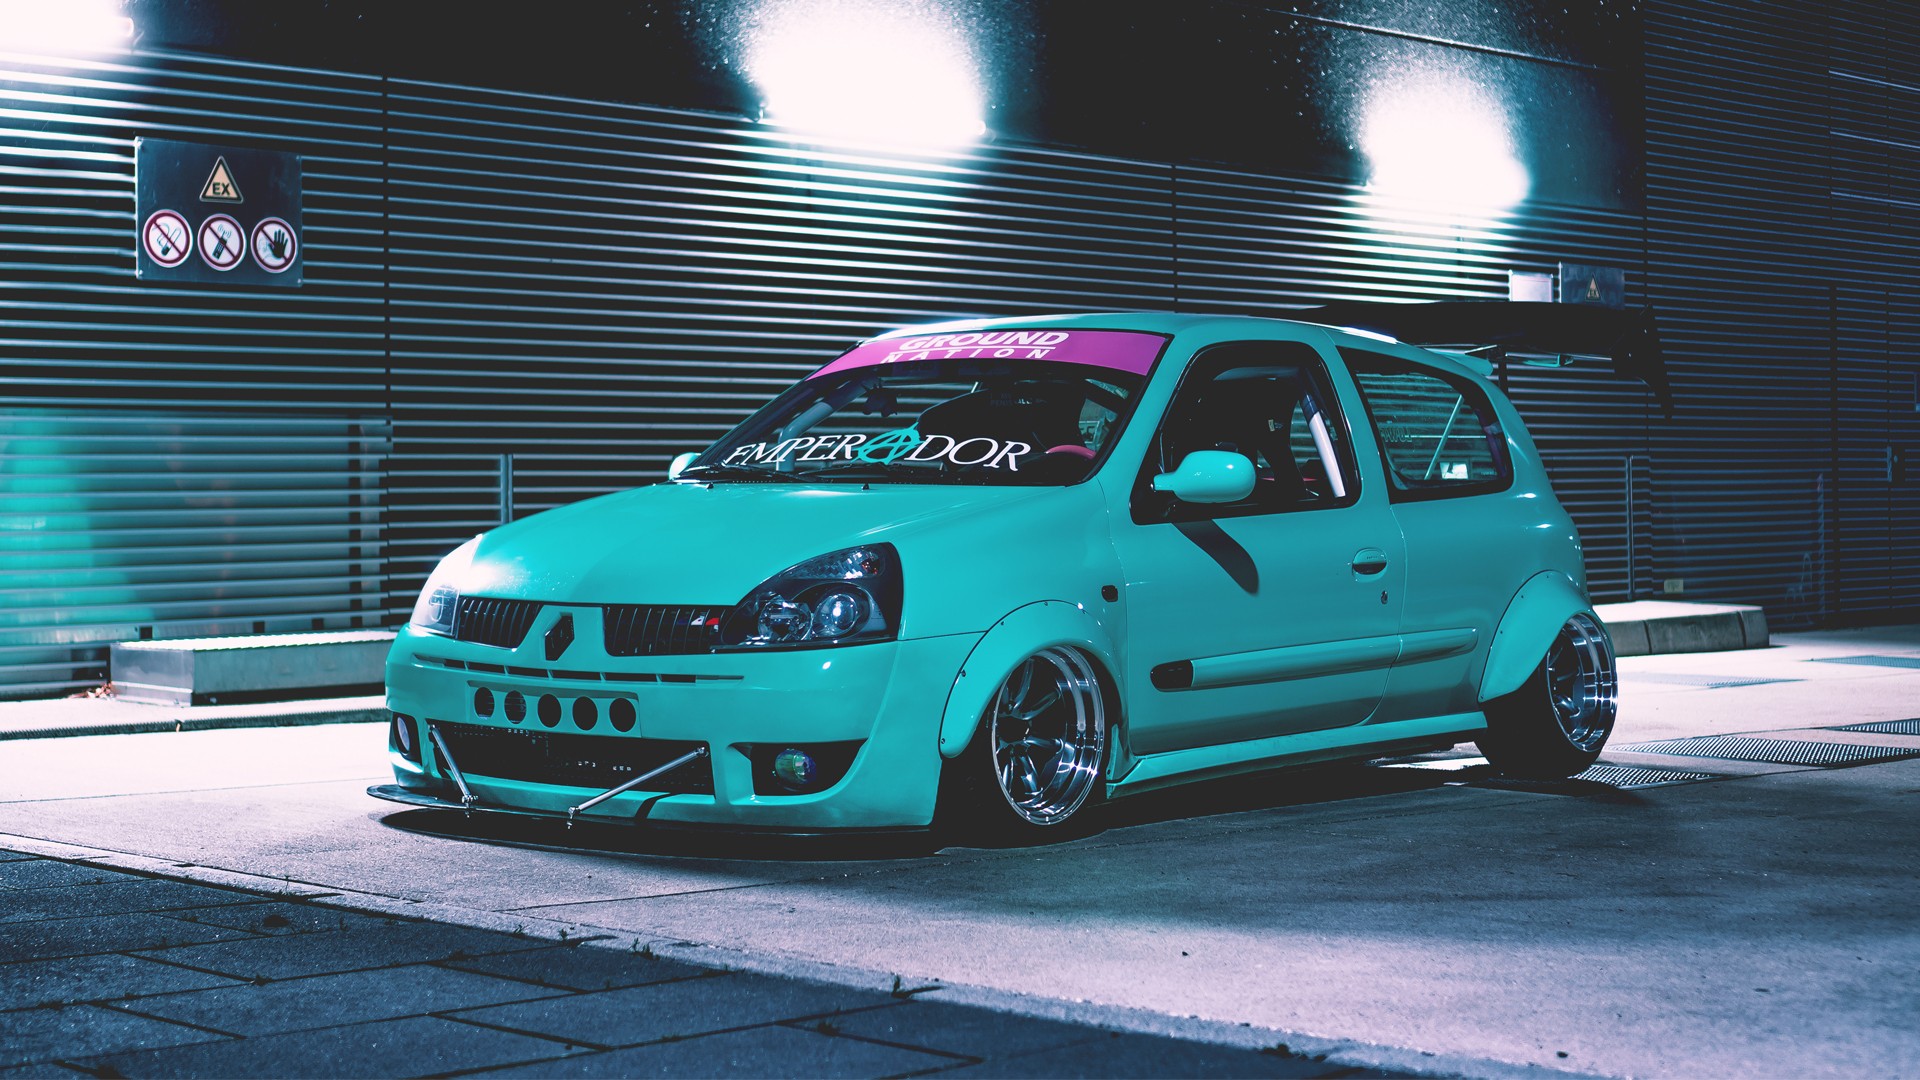 Max'Stance : Clio 2 RS 172Ch - Oovango